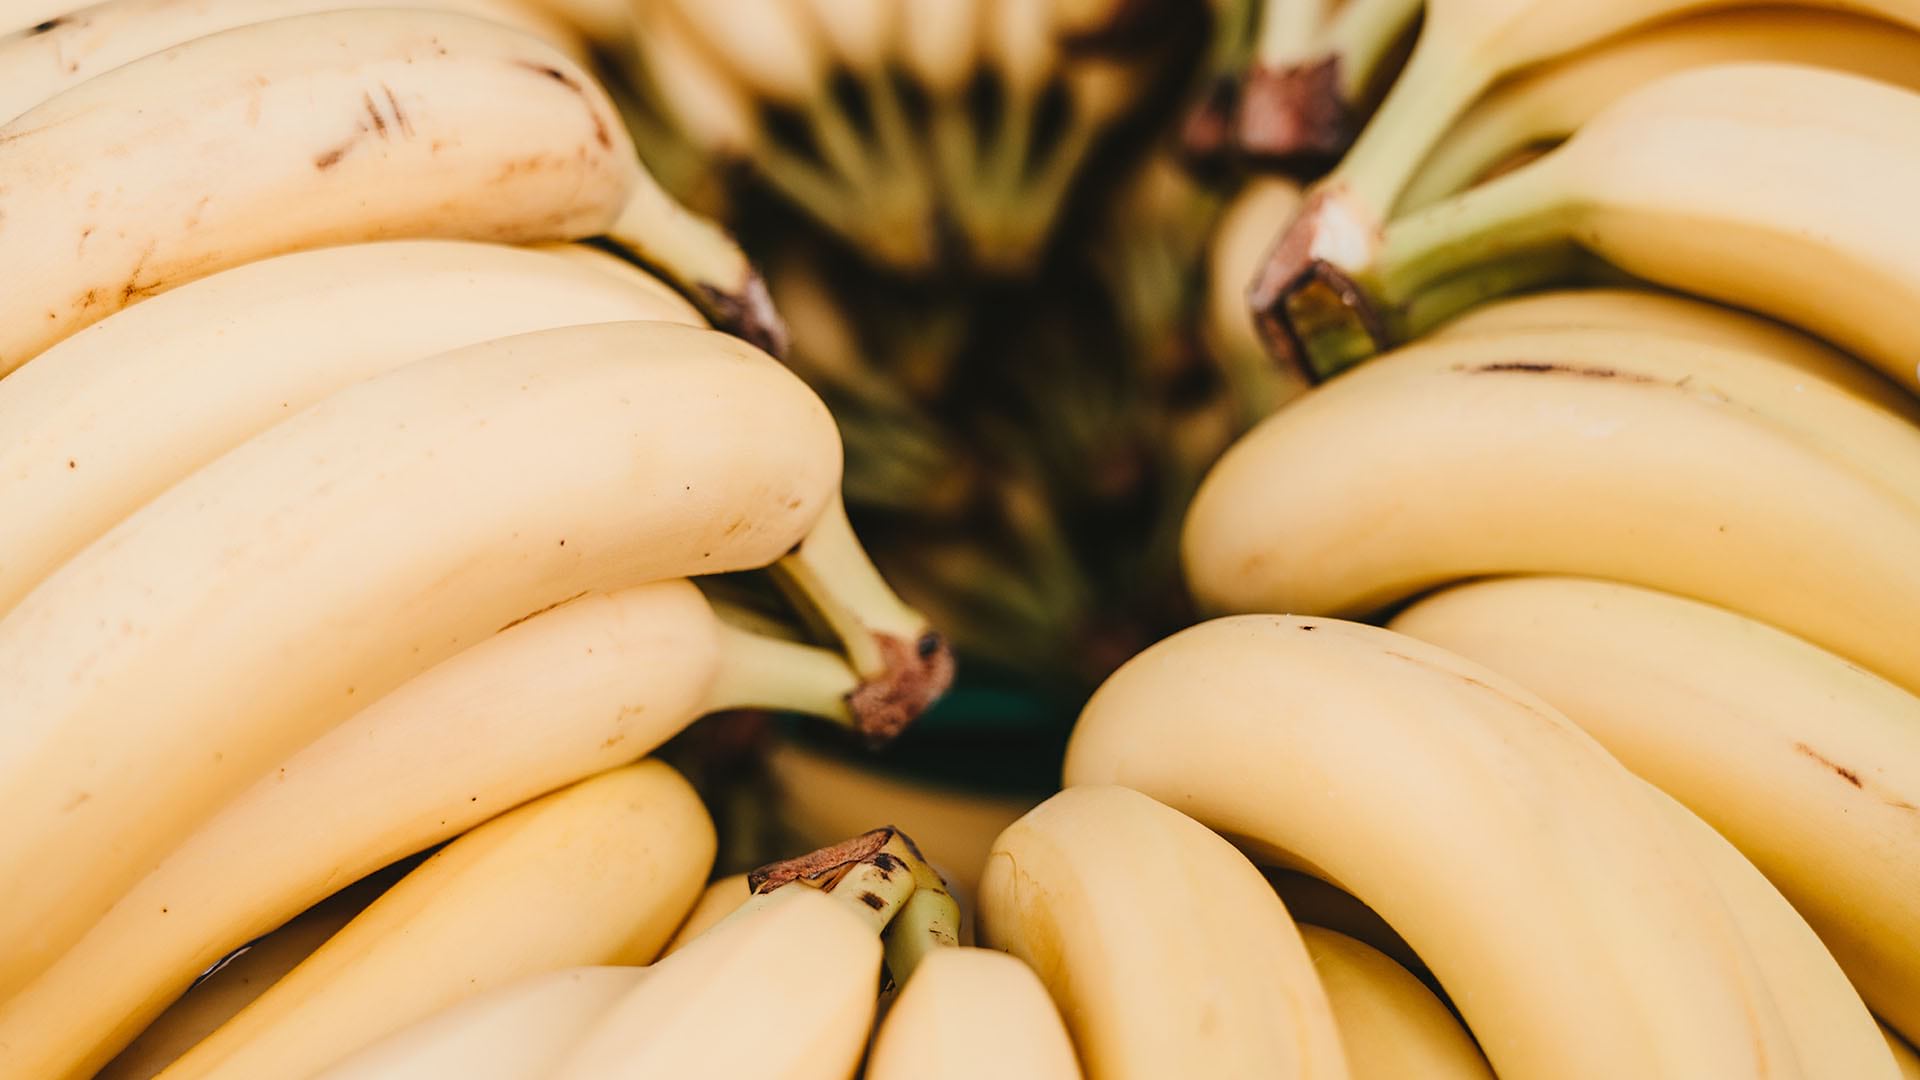 These bananas could become victims of food spoilage in the supply chain